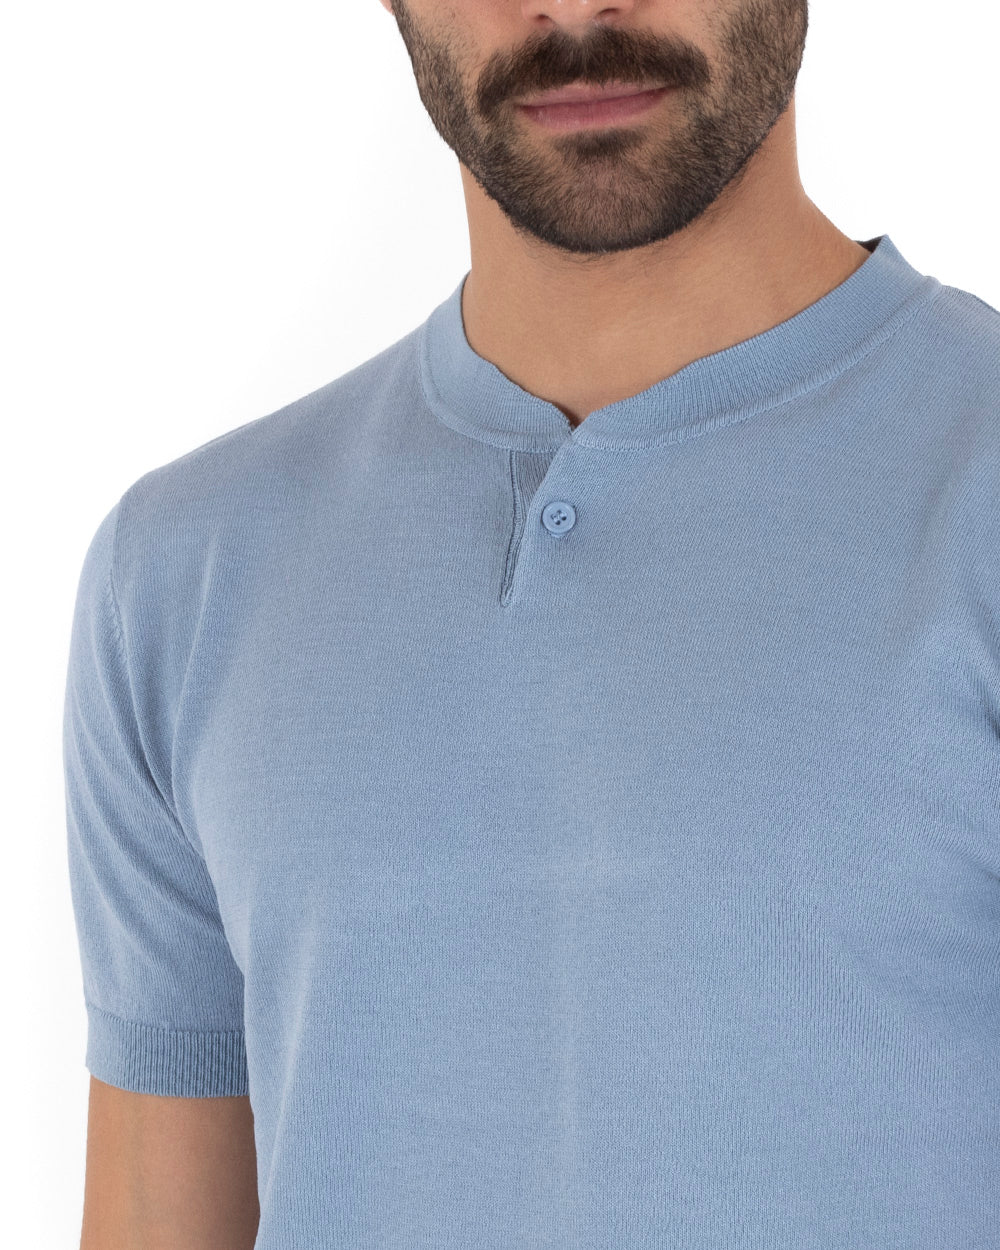 Men's T-Shirt Short Sleeve Solid Color Powder Neckline Buttons Thread Casual GIOSAL